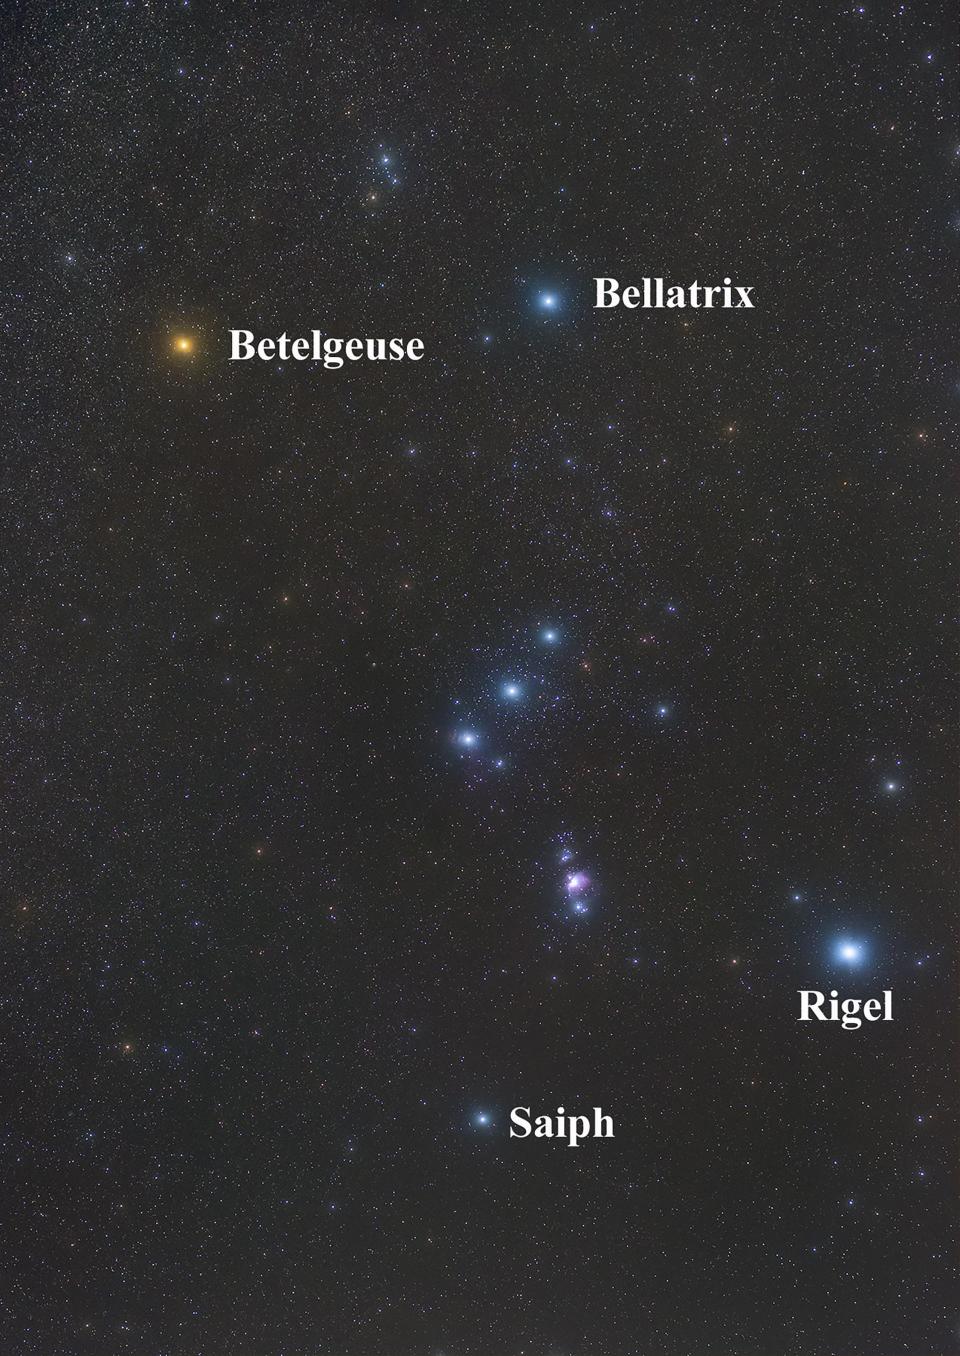 Four bright stars that form the quadrangle of the constellation Orion are labeled in this Jan. 19 photo. Months ago, the reddish star Betelgeuse was almost as bright as Rigel, but recently Betelgeuse has undergone historic fading. In late January it was closer in brightness to Bellatrix. [Johnny Horne for The Fayetteville Observer]